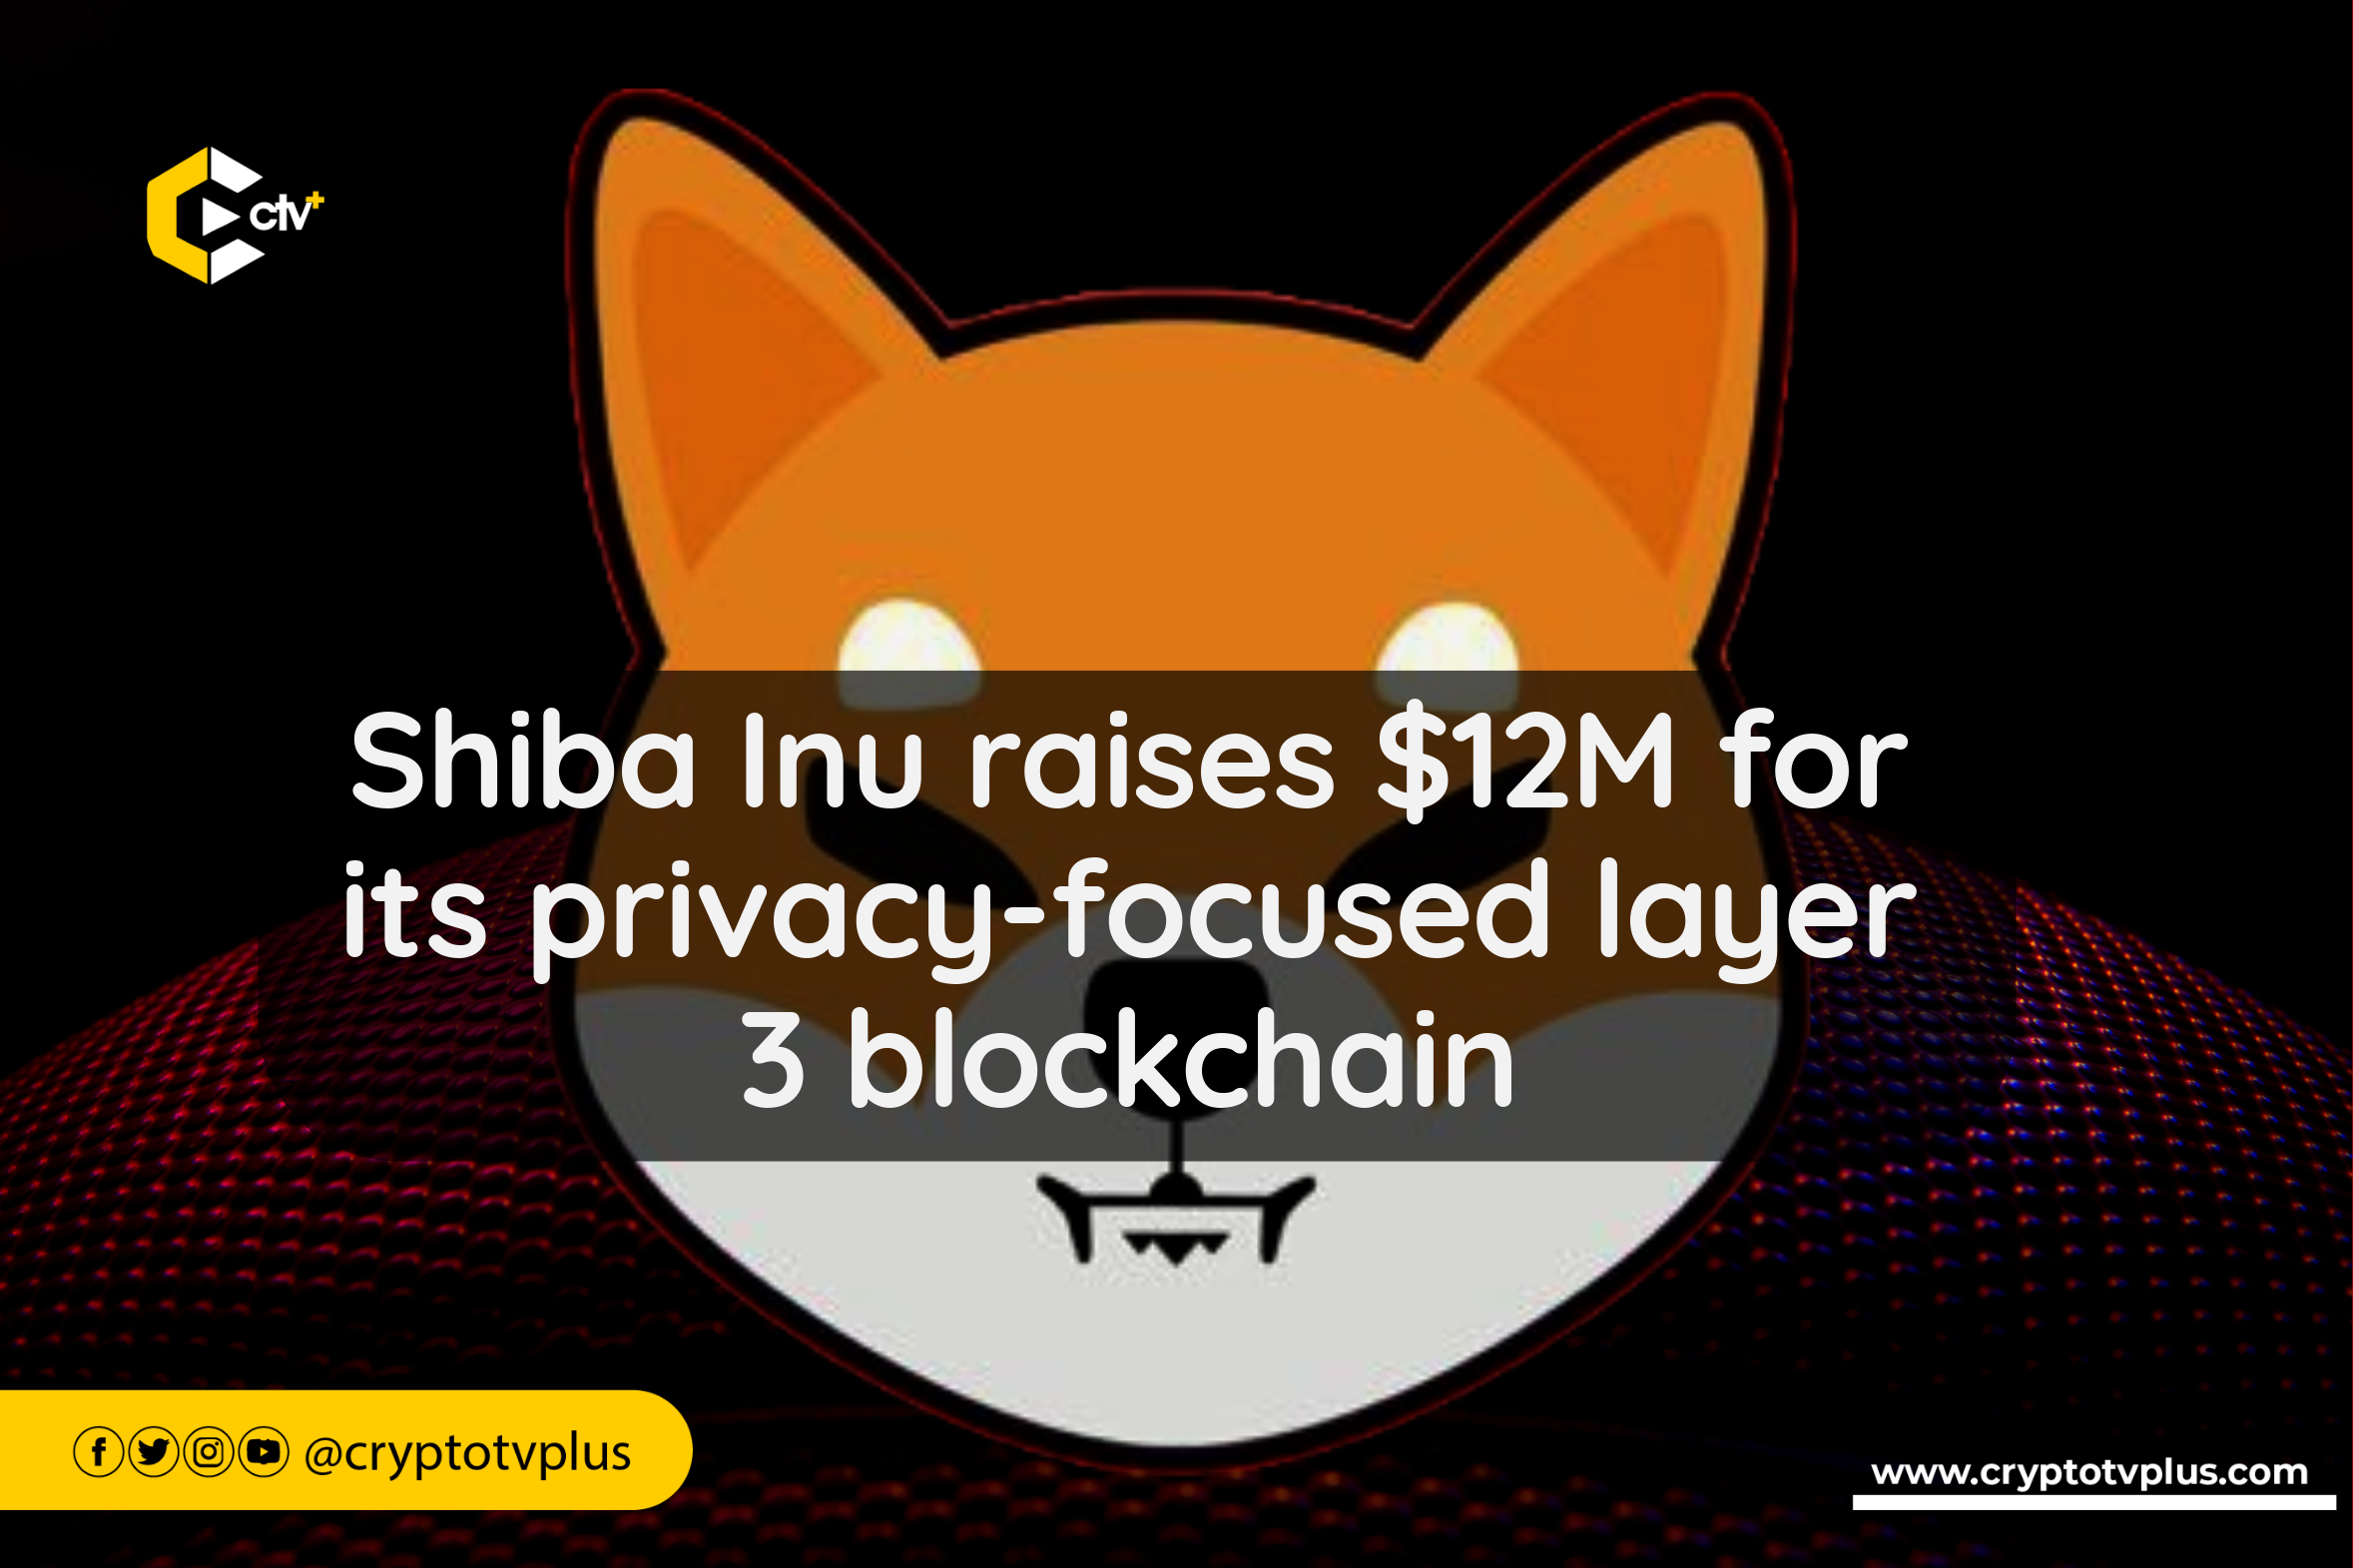 Shiba Inu successfully raised $12 million in funding for TREAT, its new privacy-centric layer 3 blockchain aimed at addressing privacy and trust.